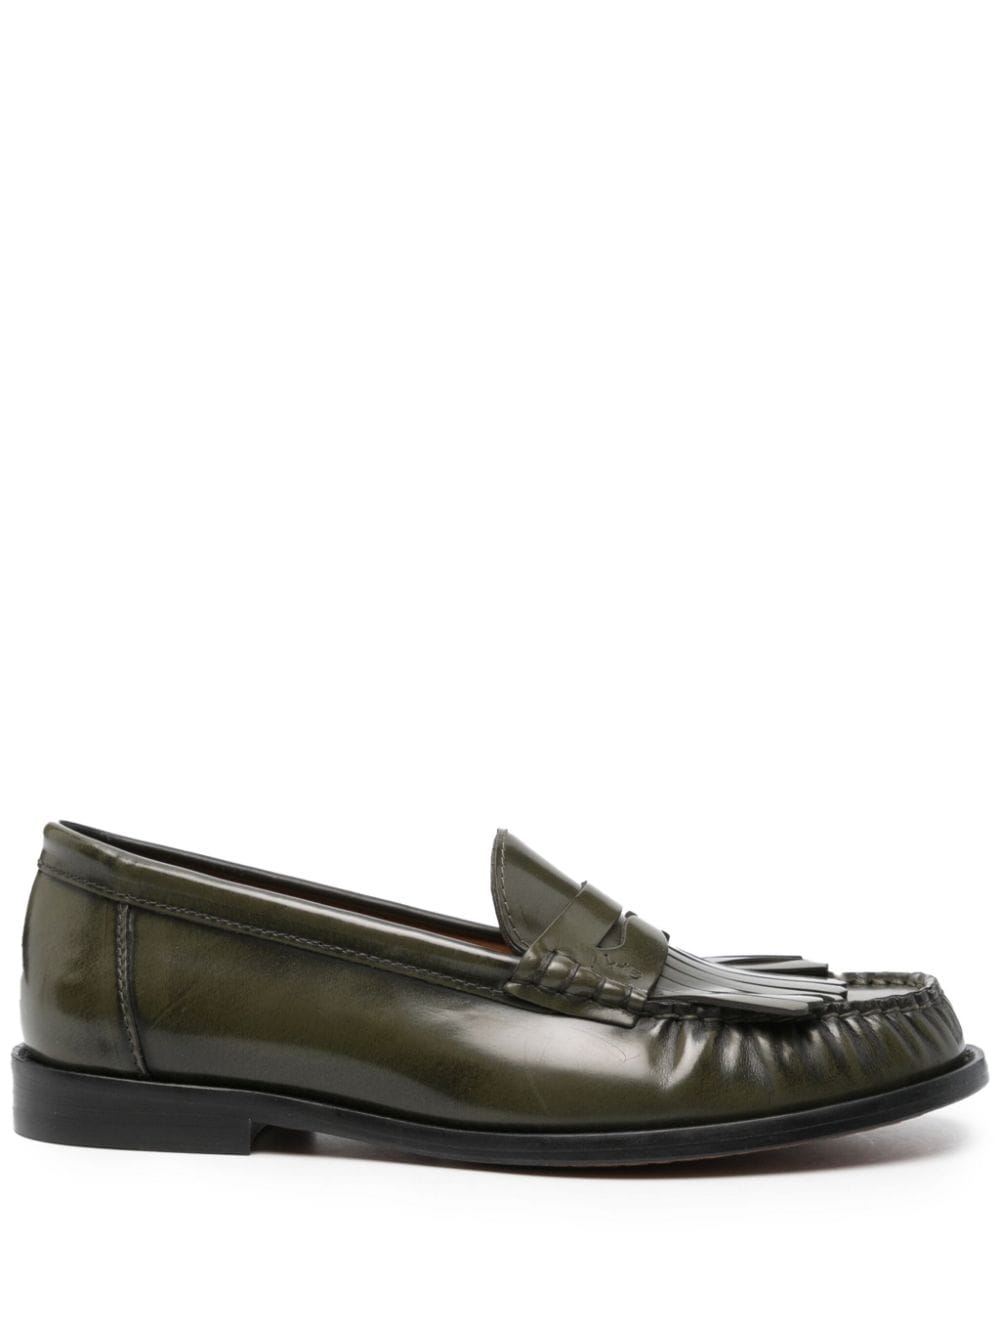 Polo Ralph Lauren fringed leather loafers - Green von Polo Ralph Lauren